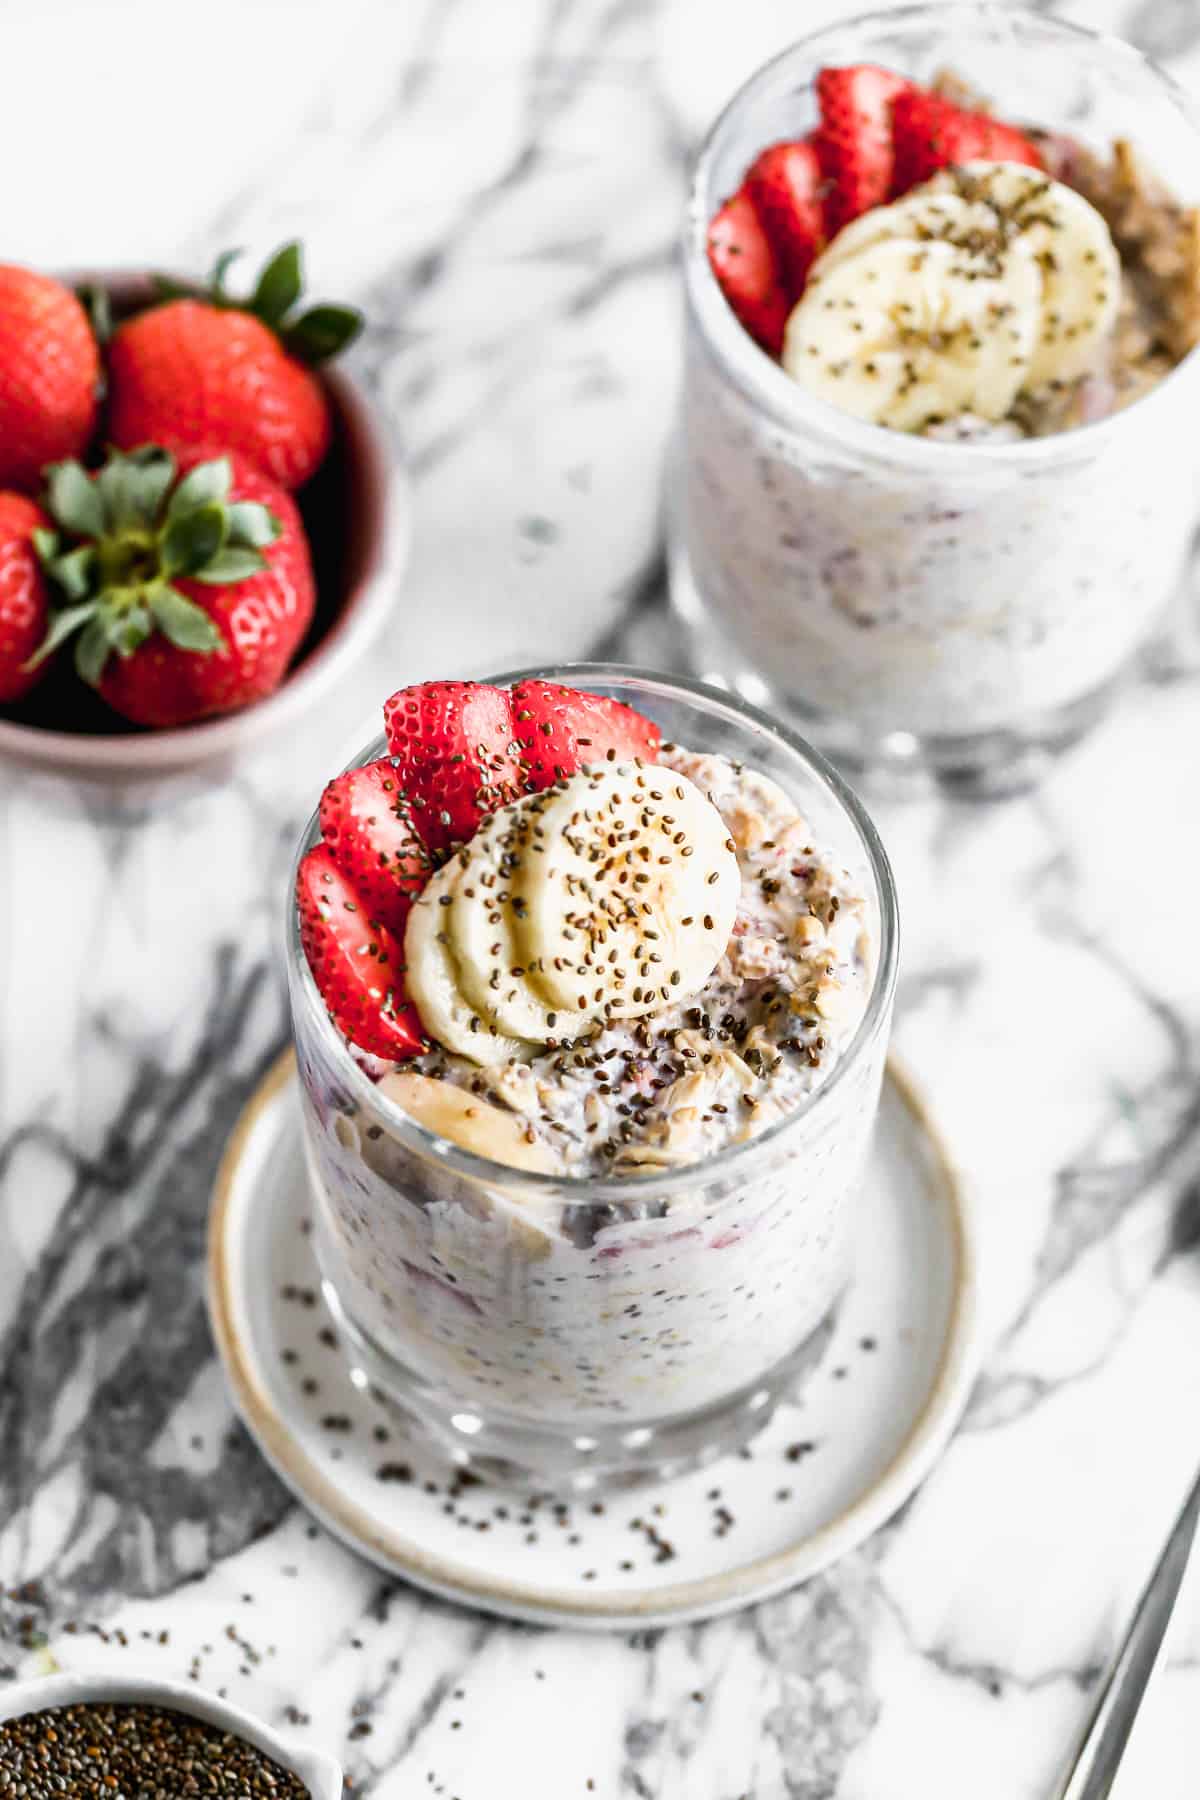 A glass of healthy Strawberry Overnight Oats recipe, topped with fresh sliced strawberries, bananas, and a sprinkle of chia seeds.